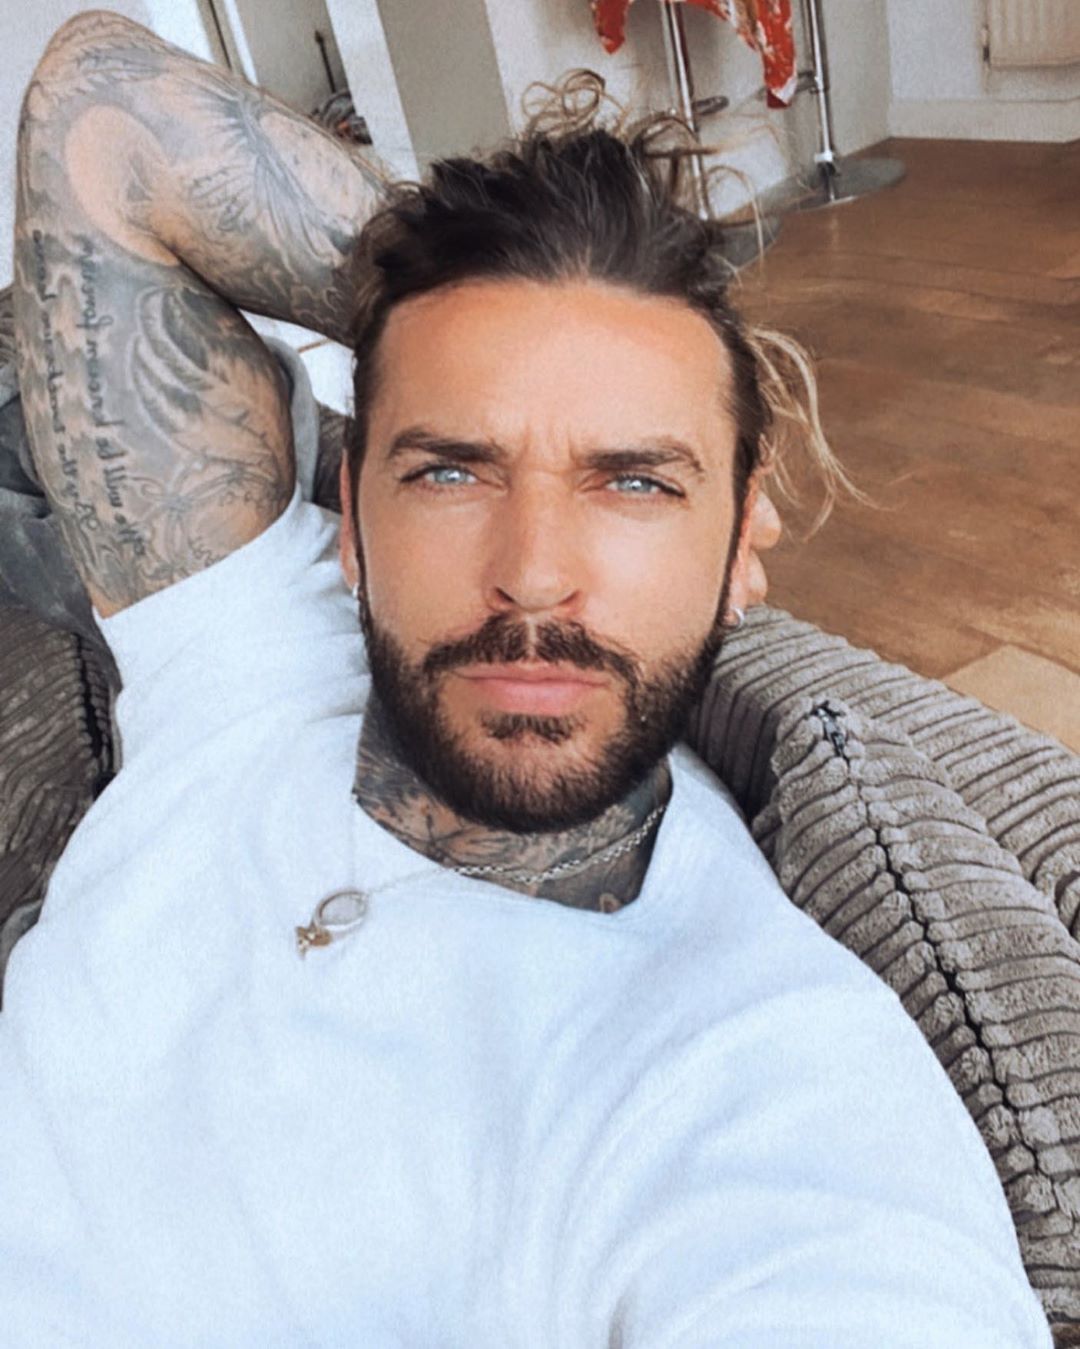 Inside MasterChef star Pete Wicks' Essex home with minimalist interiors and patio swing for his two rescue dogs